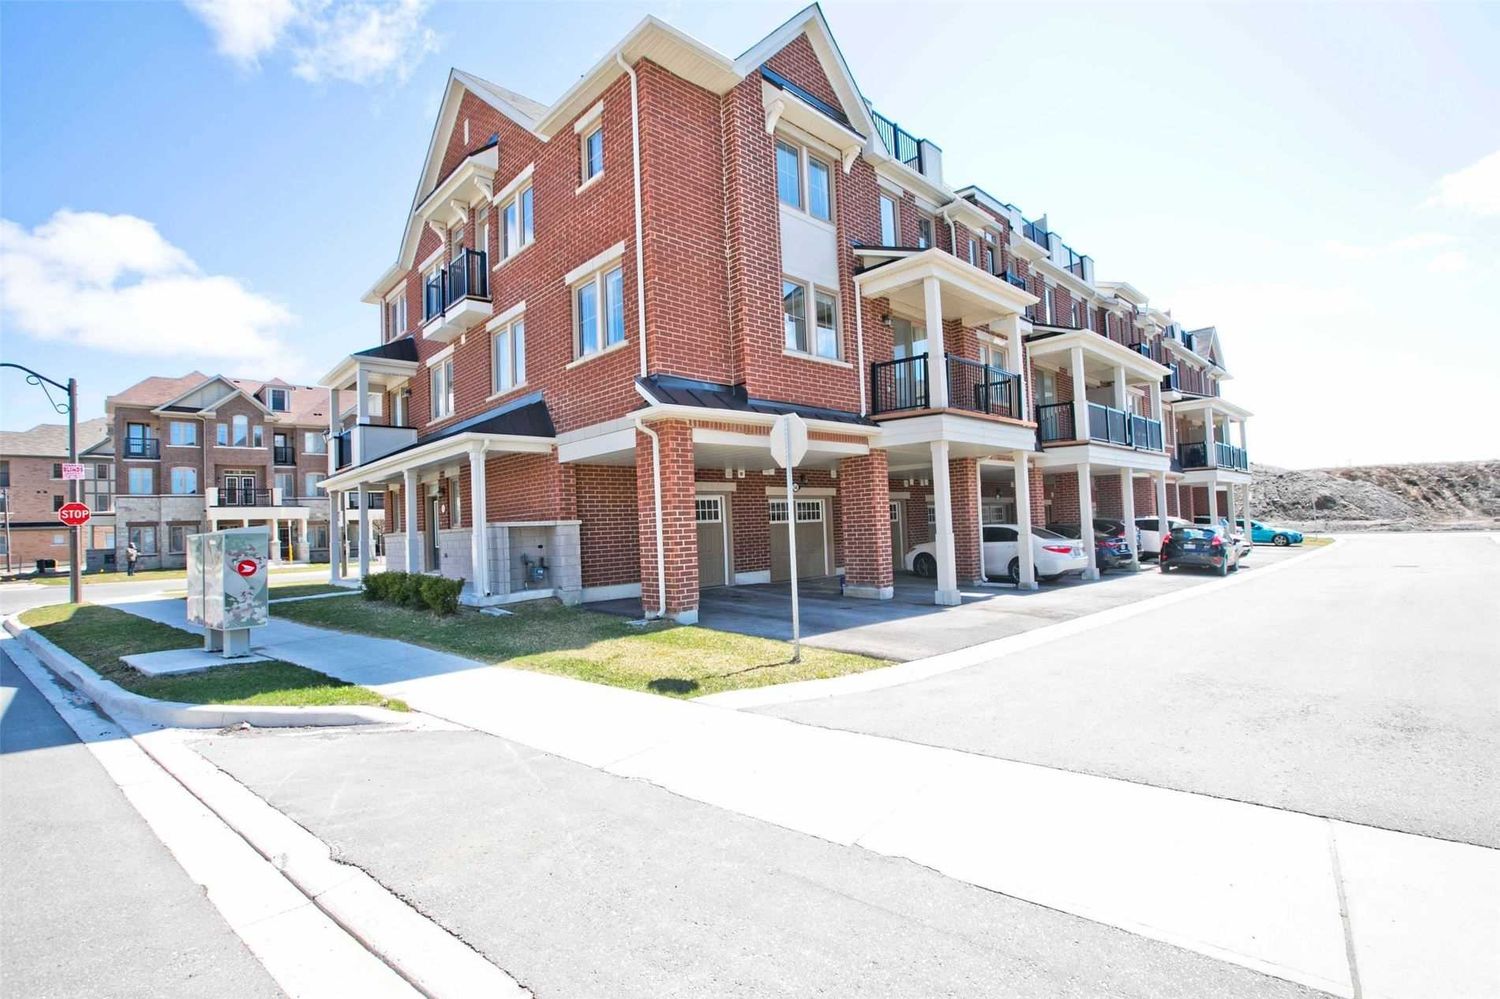 40-98 Cornell Centre Boulevard. Cornell Markham Townhomes is located in  Markham, Toronto - image #2 of 2